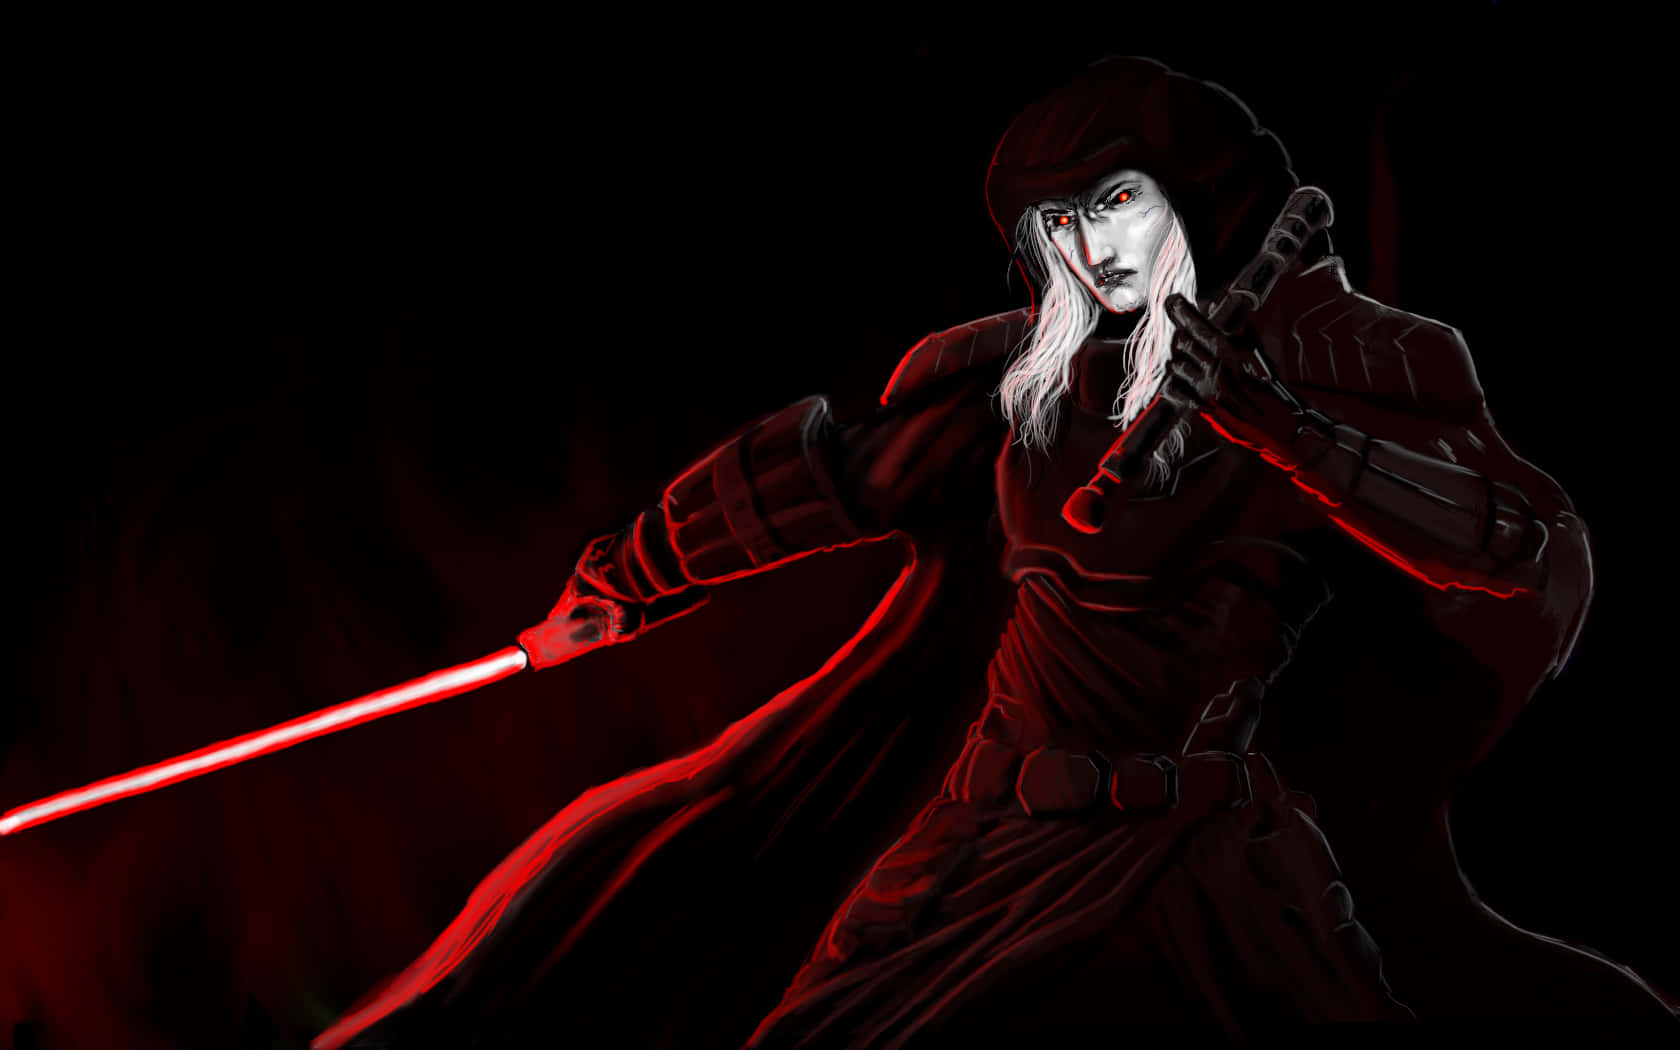 Fear the power of the Sith Lord" Wallpaper